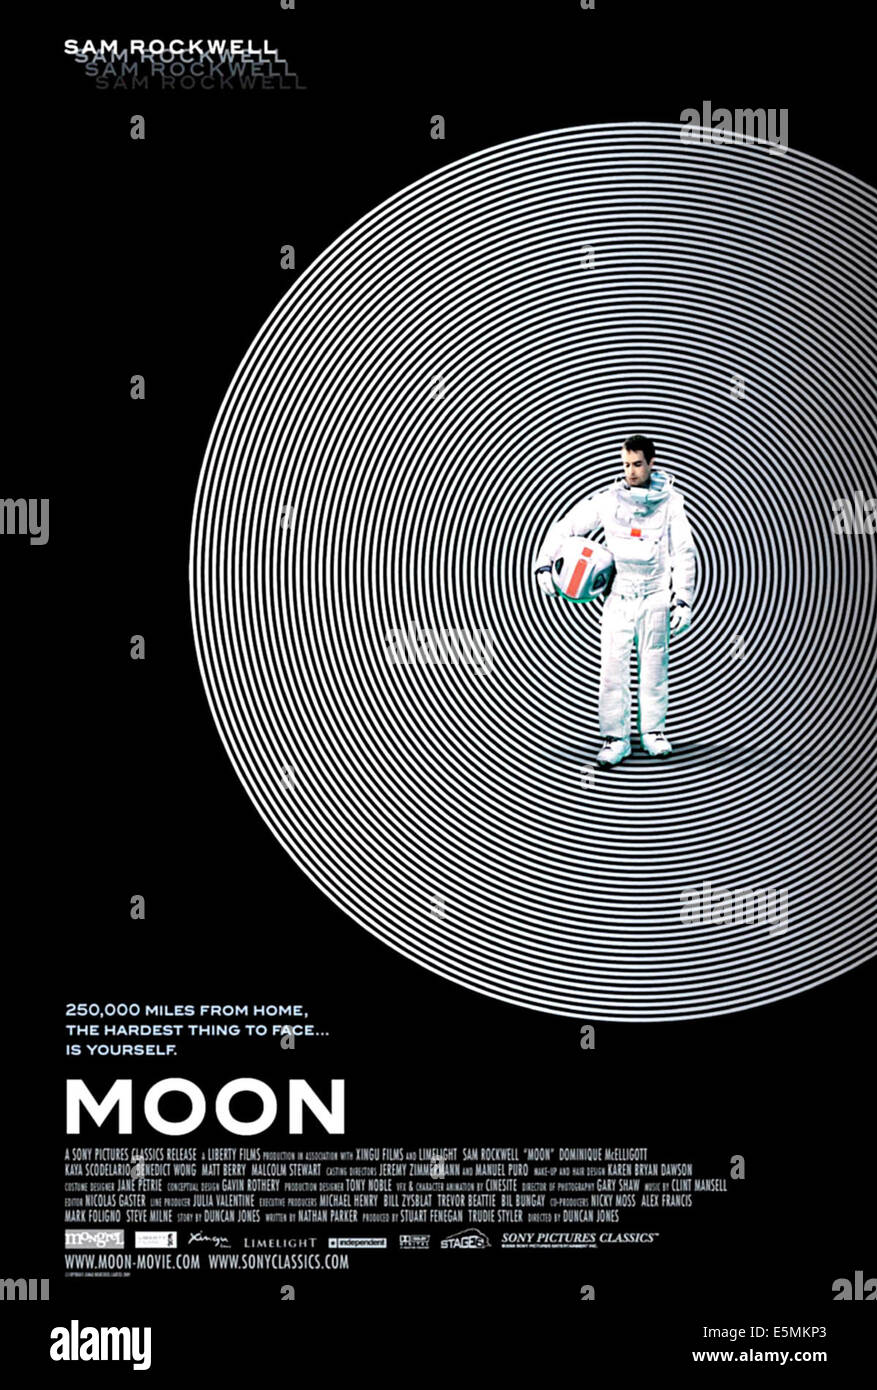 Mond, Sam Rockwell, 2009. © Sony Pictures Classics/Courtesy Everett Collection Stockfoto